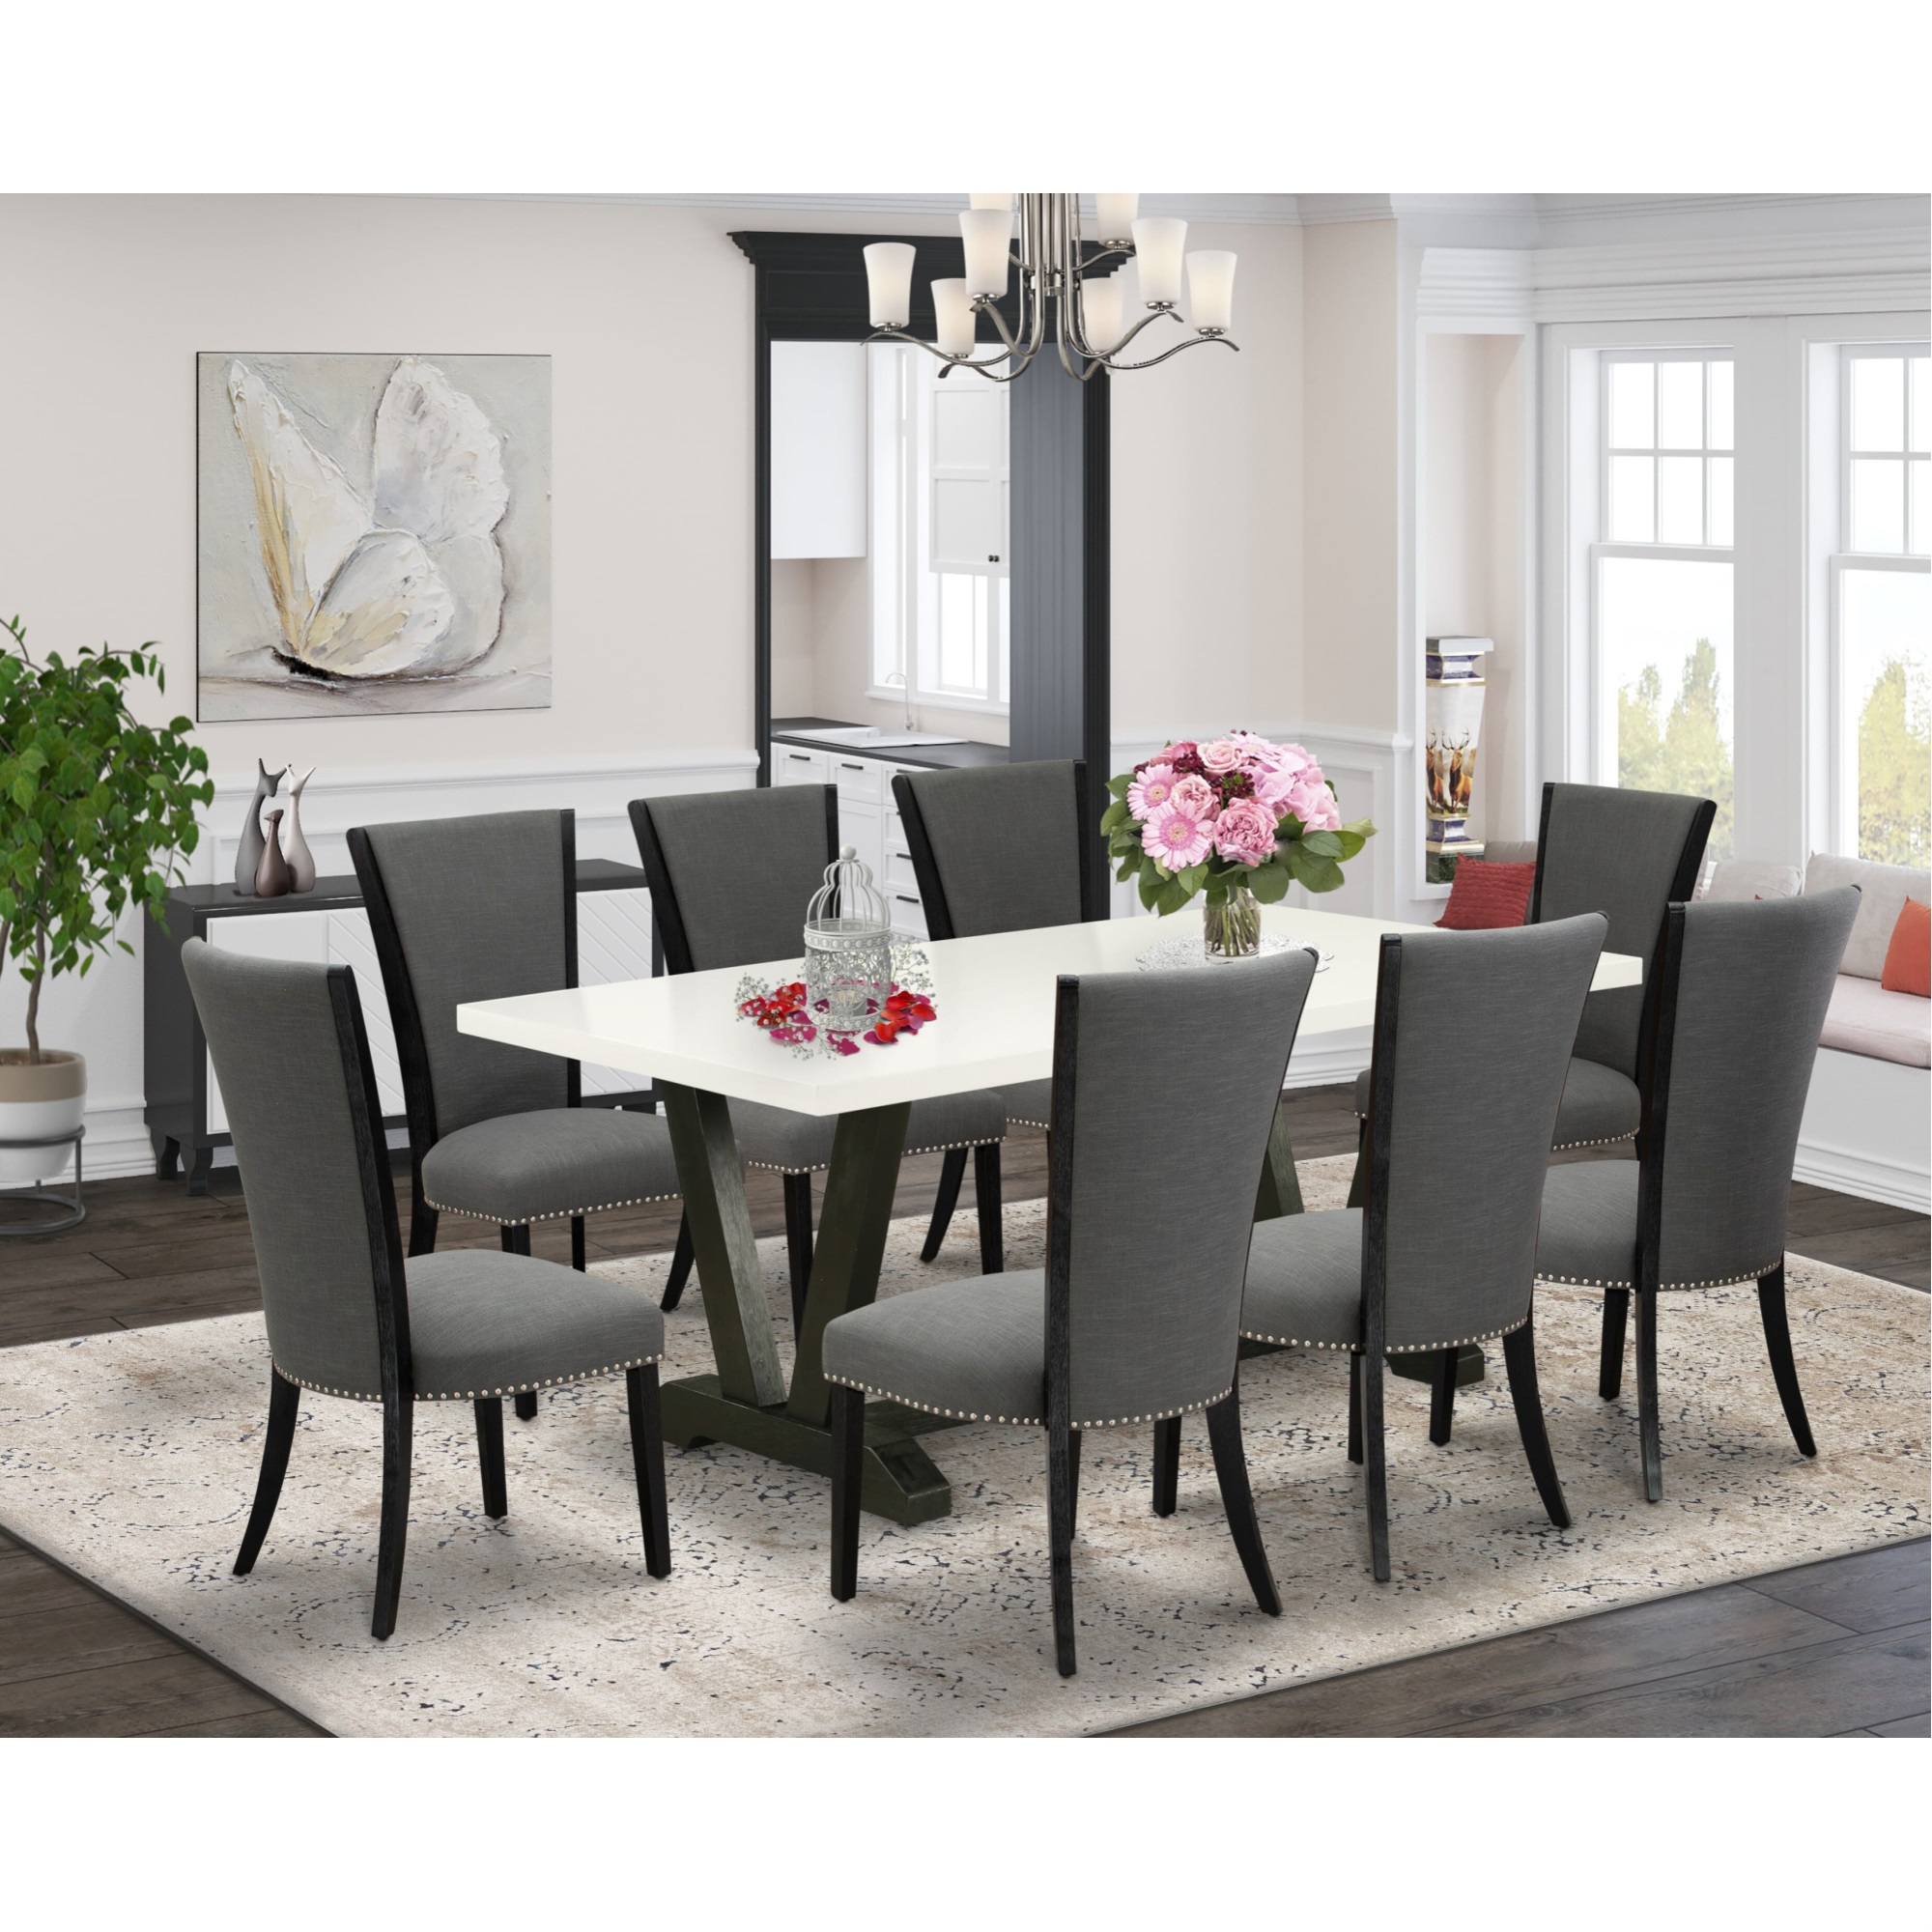 East West Furniture V627VE650-9 9 Piece Dining Room Table Set Includes a Linen White Dining Room Table and 8 Dark Gotham Grey Linen Fabric Dining C